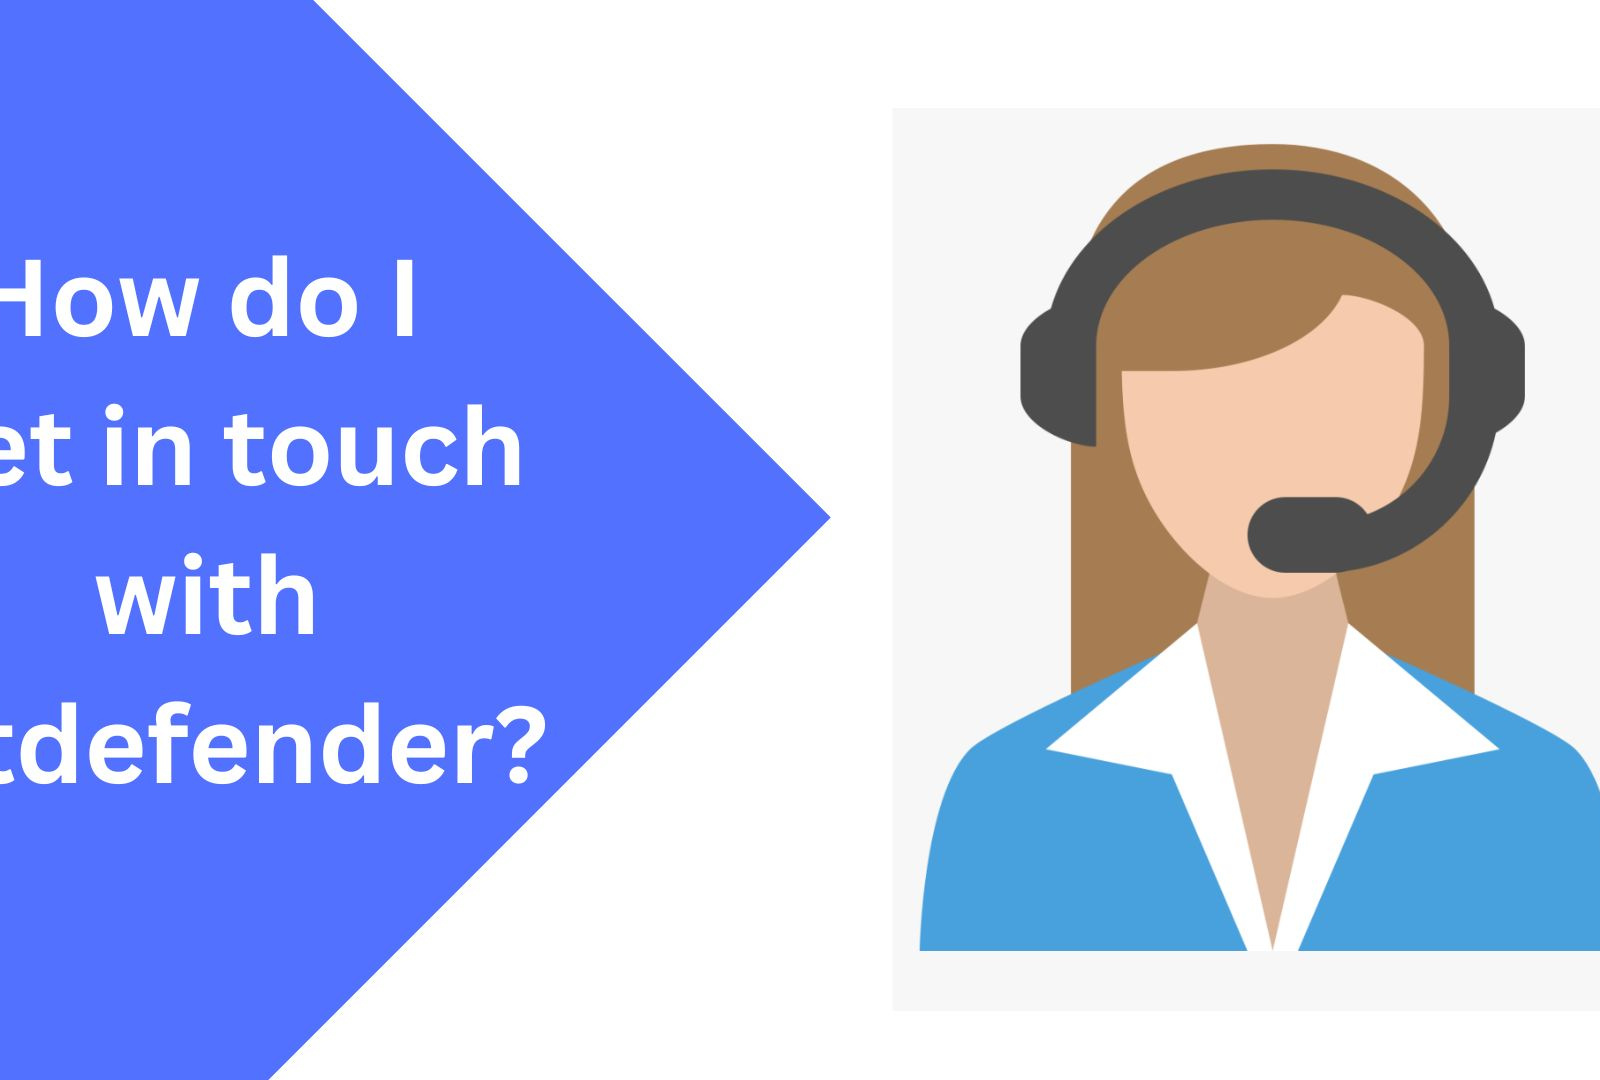 how-do-i-get-in-touch-with-bitdefender-by-noah-williams-on-dribbble